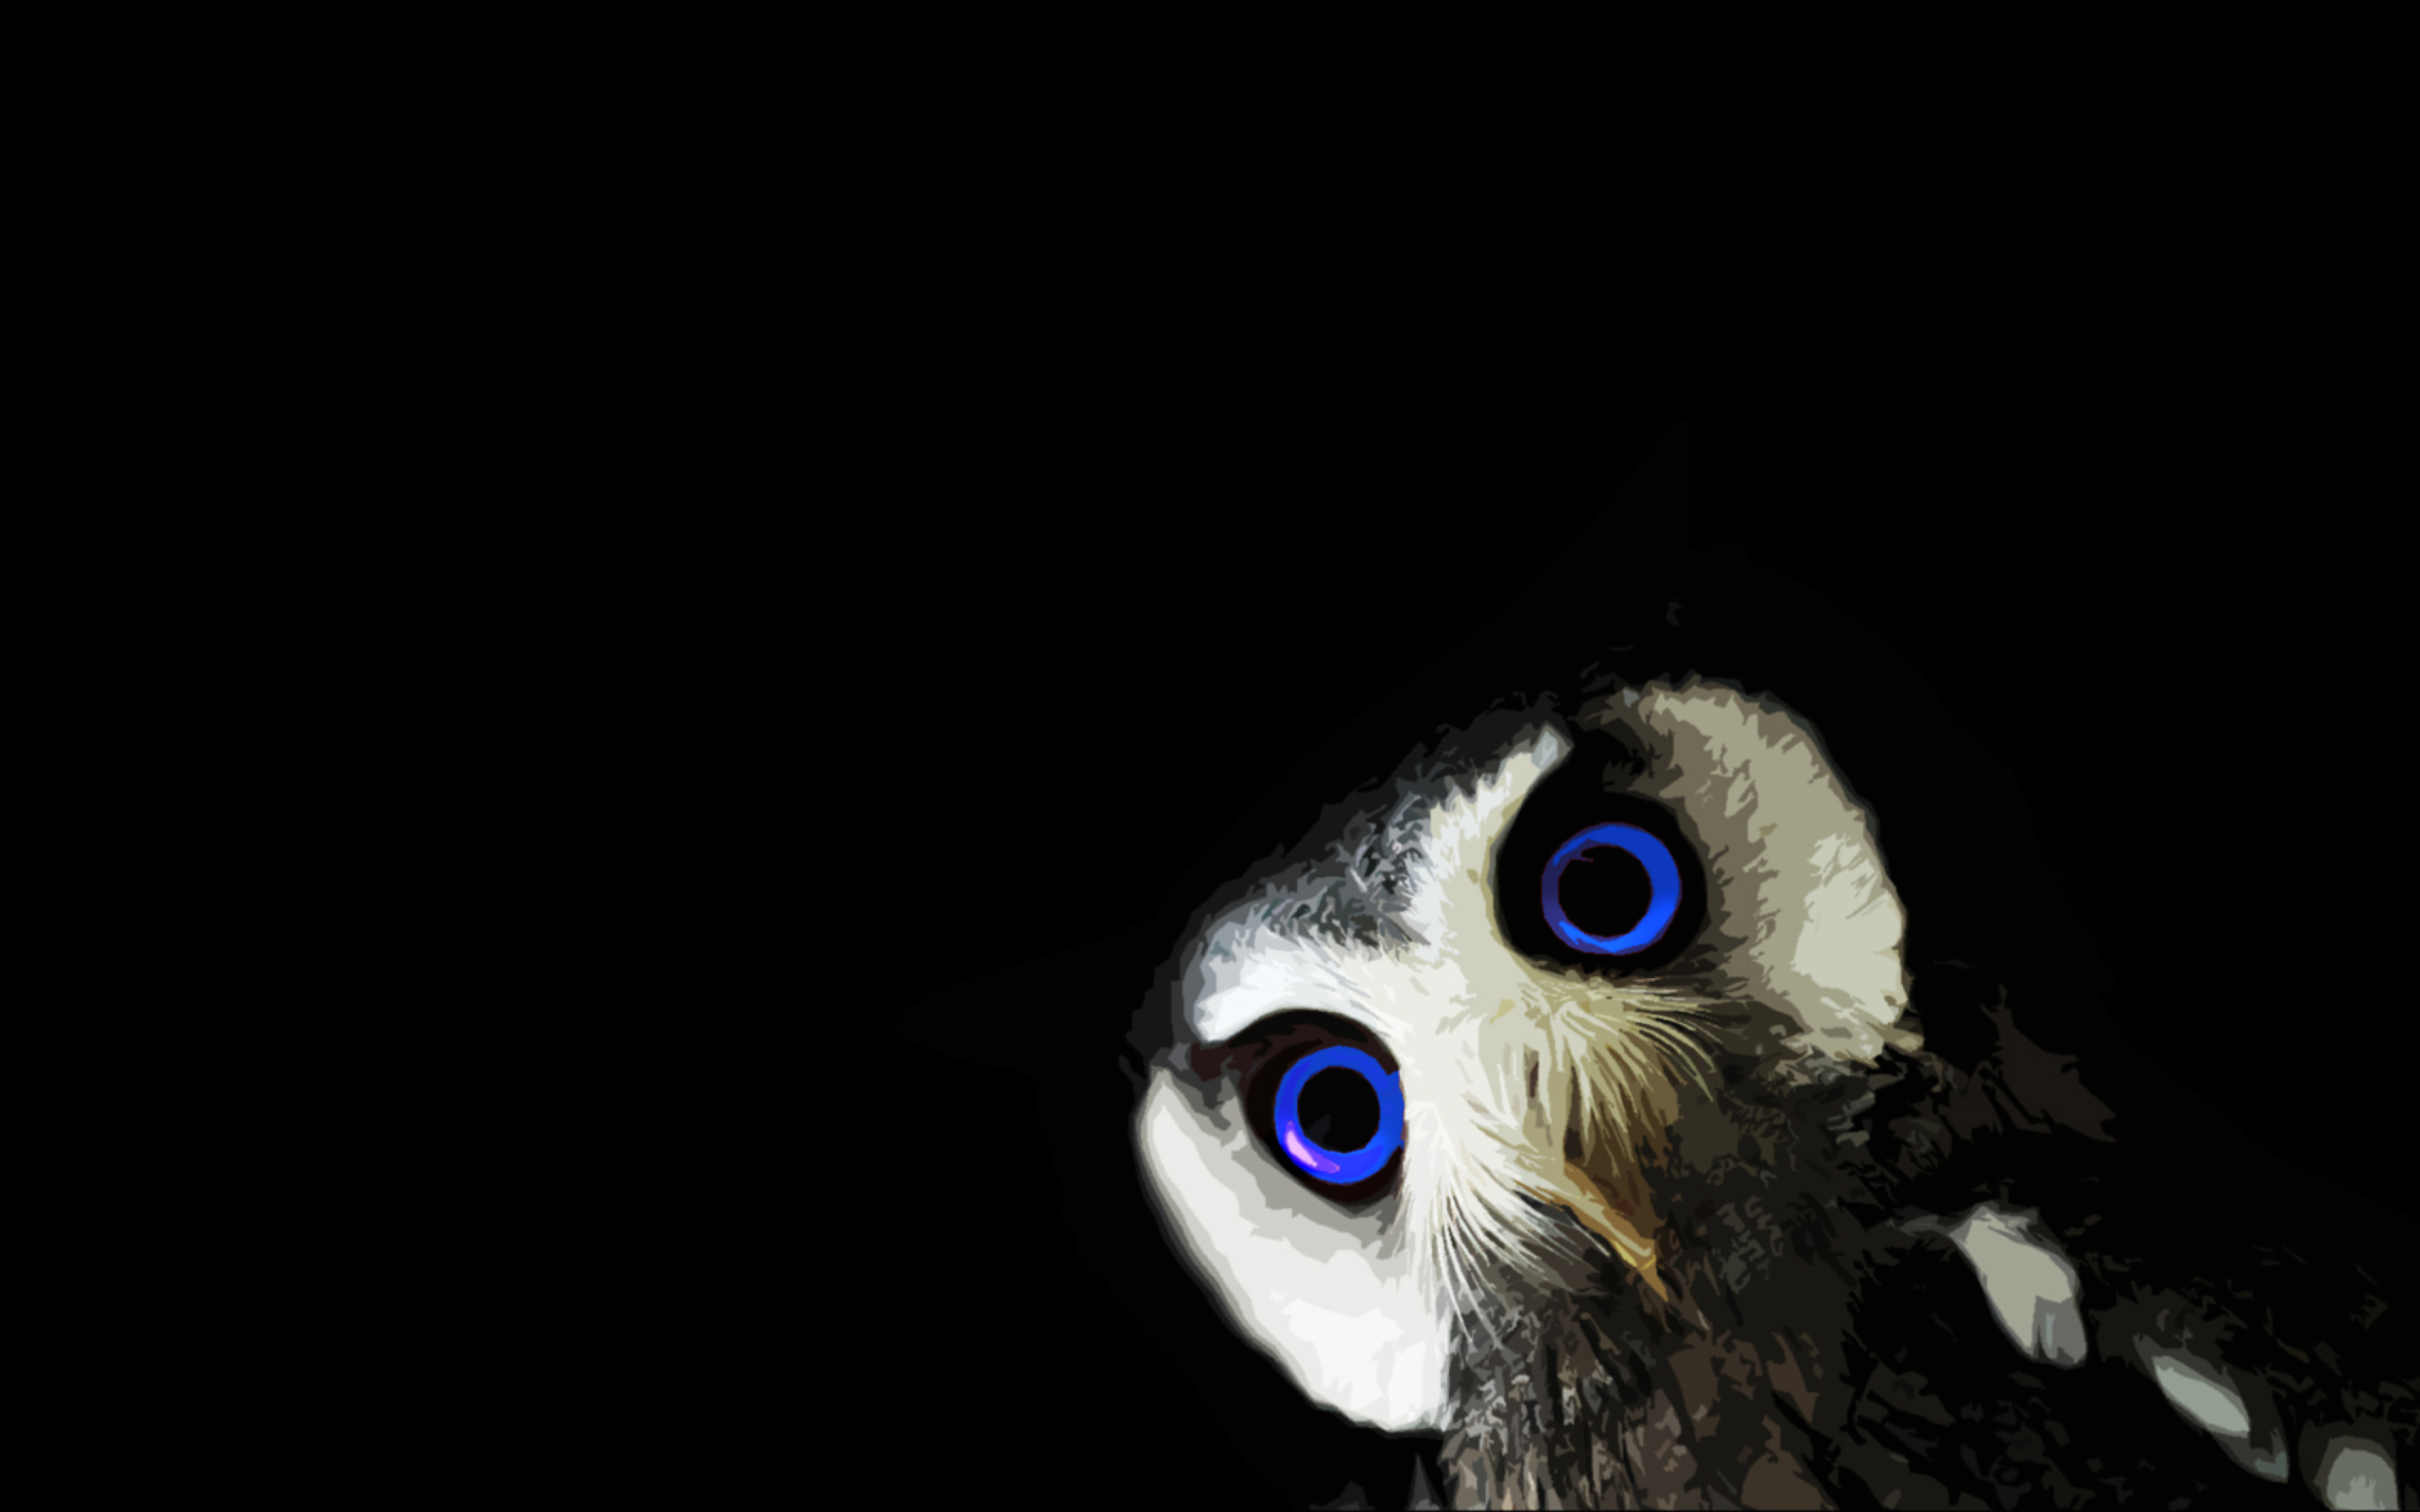 Funny Owl With Big Blue Eyes wallpaper 2560x1600